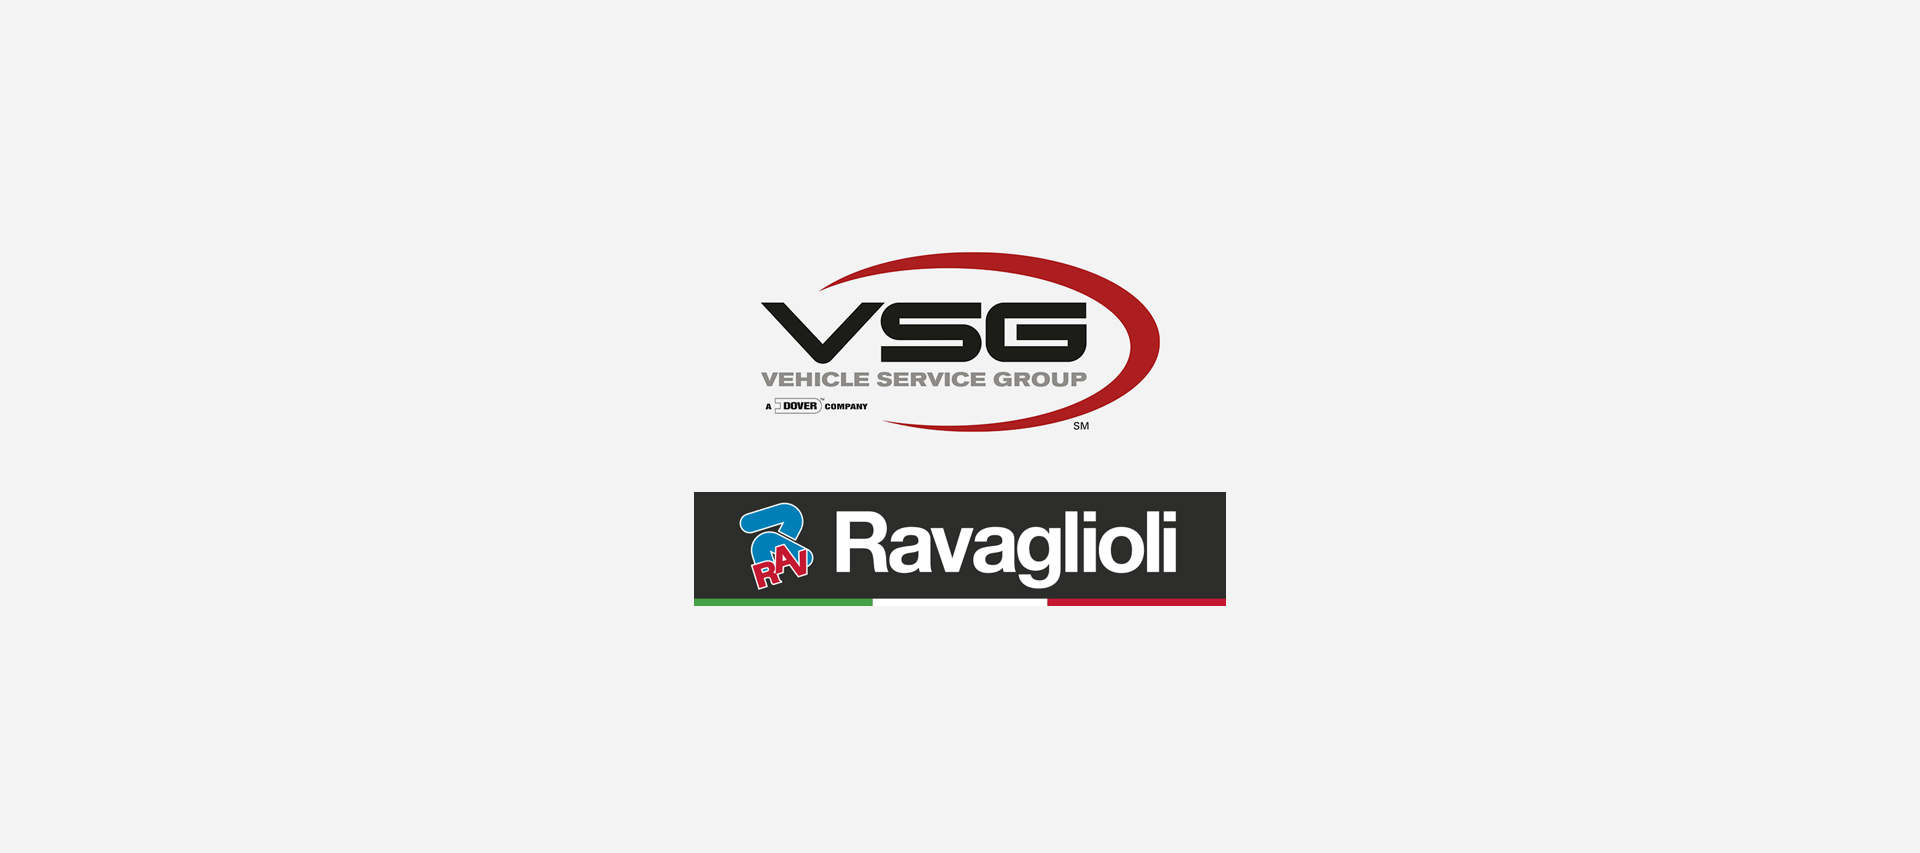 Vehicle Service Group adquiere Ravaglioli S.p.A. Group